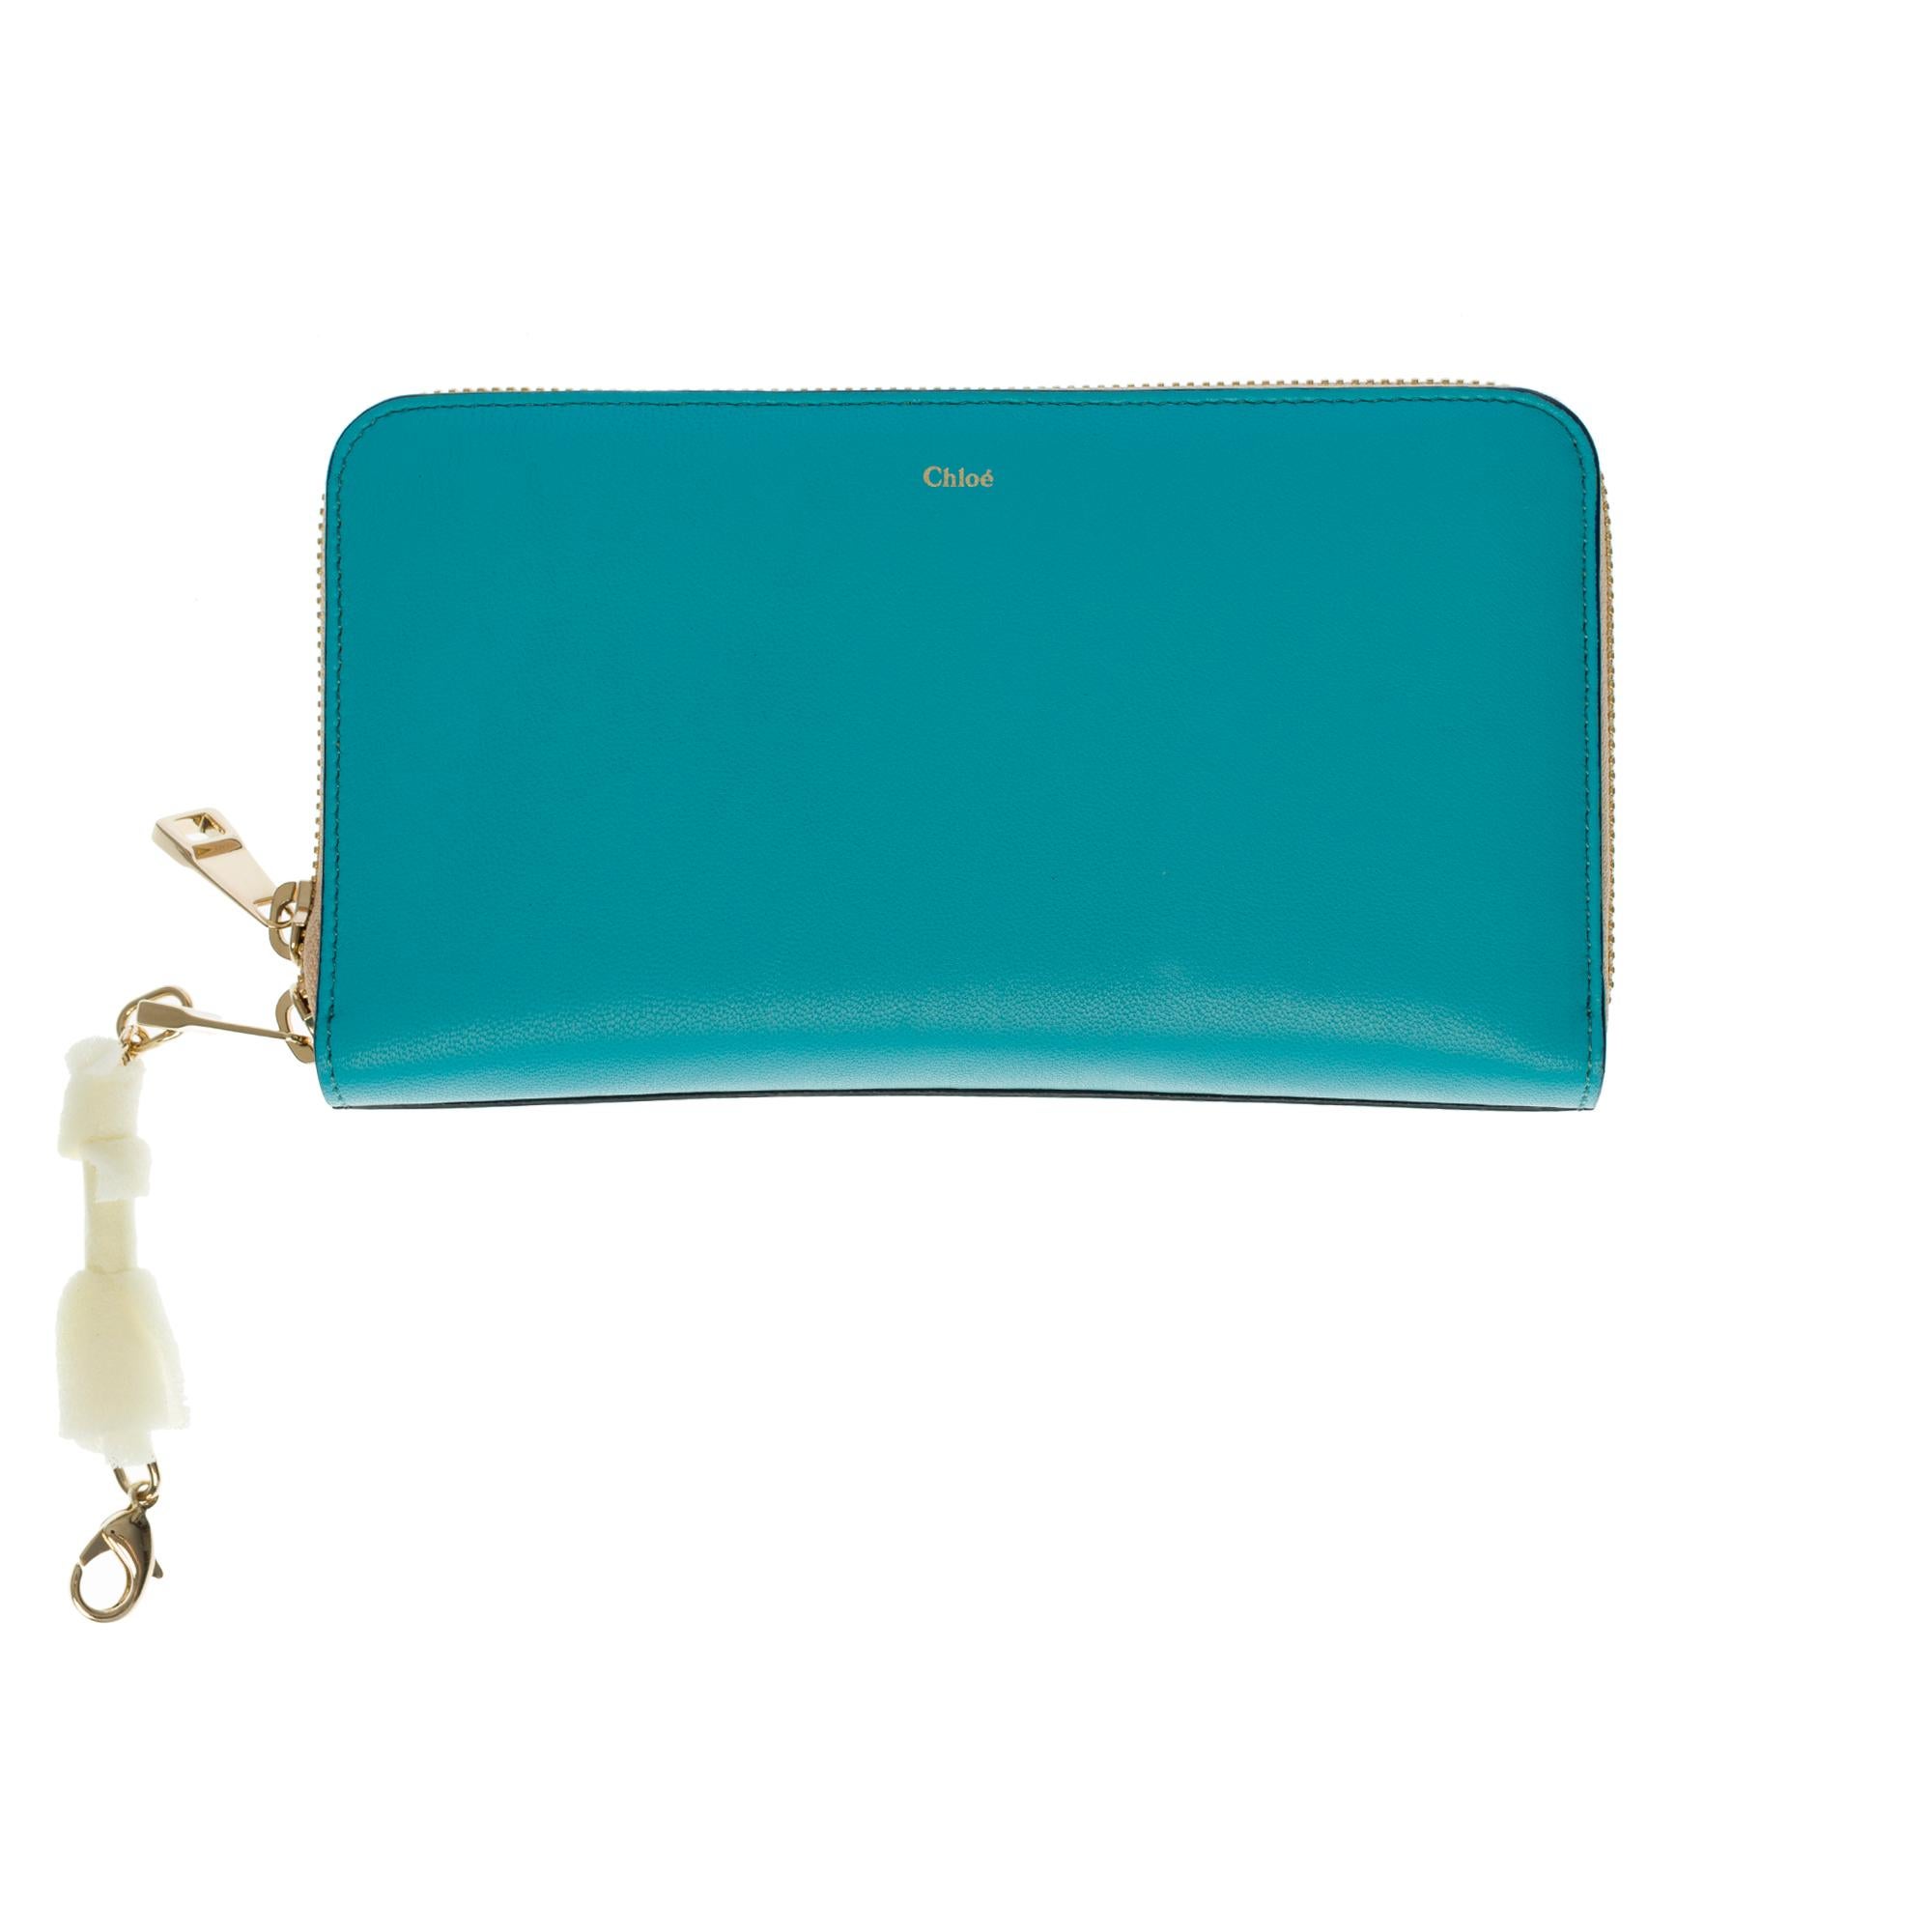 Beautiful Chloé wallet in two-tone black & turquoise lambskin leather, gold-tone metal hardware.
12 card compartments.
1 coin compartment with zip closure
Signature: 